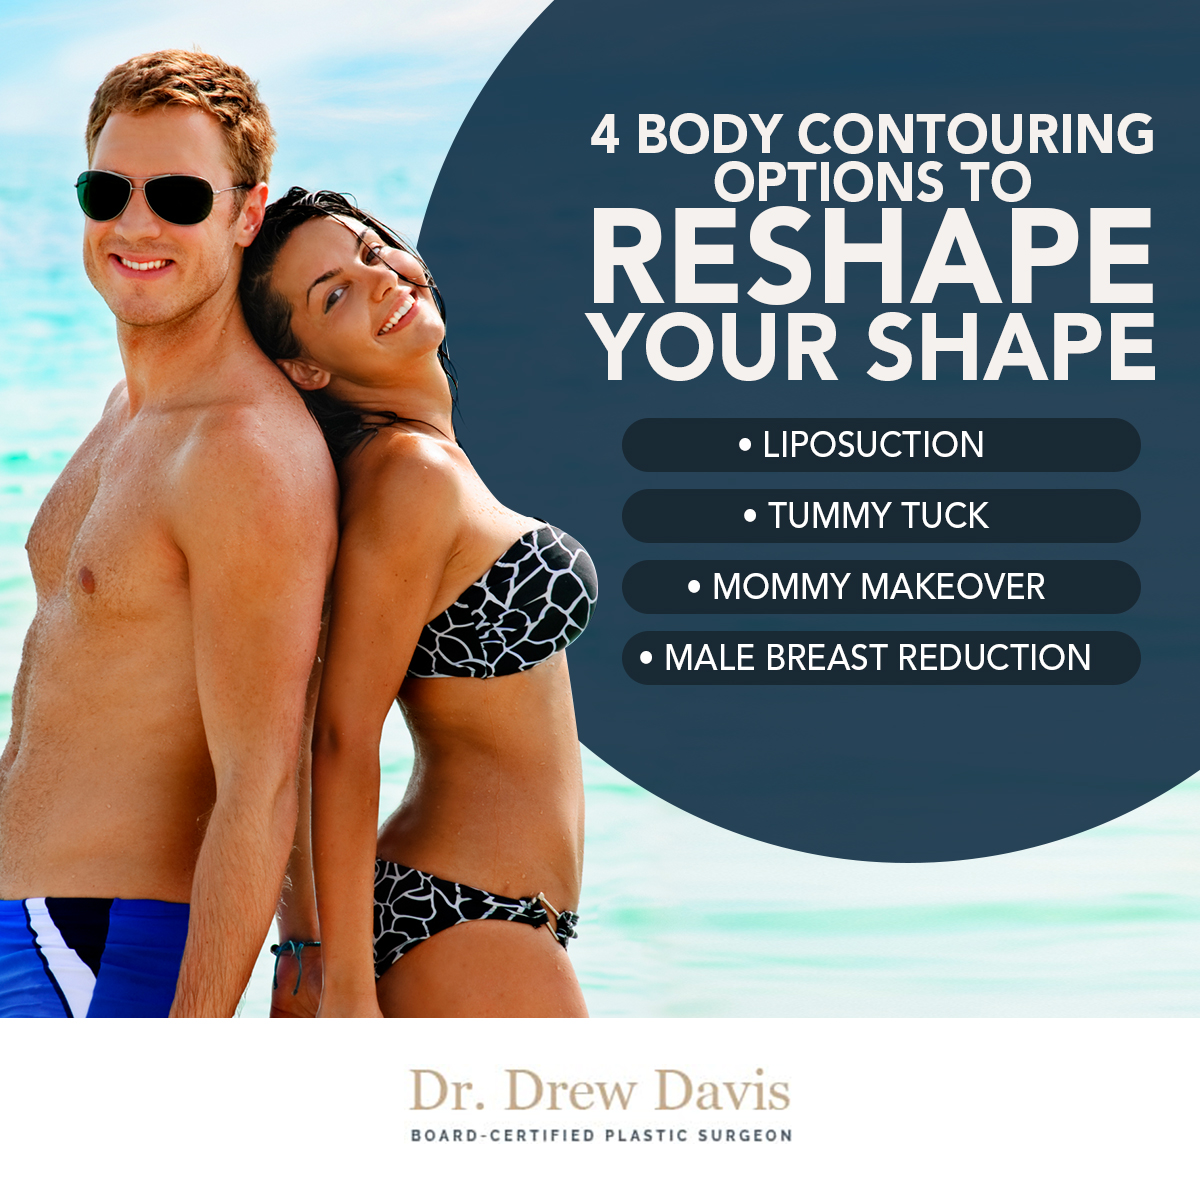 Body Contouring Options